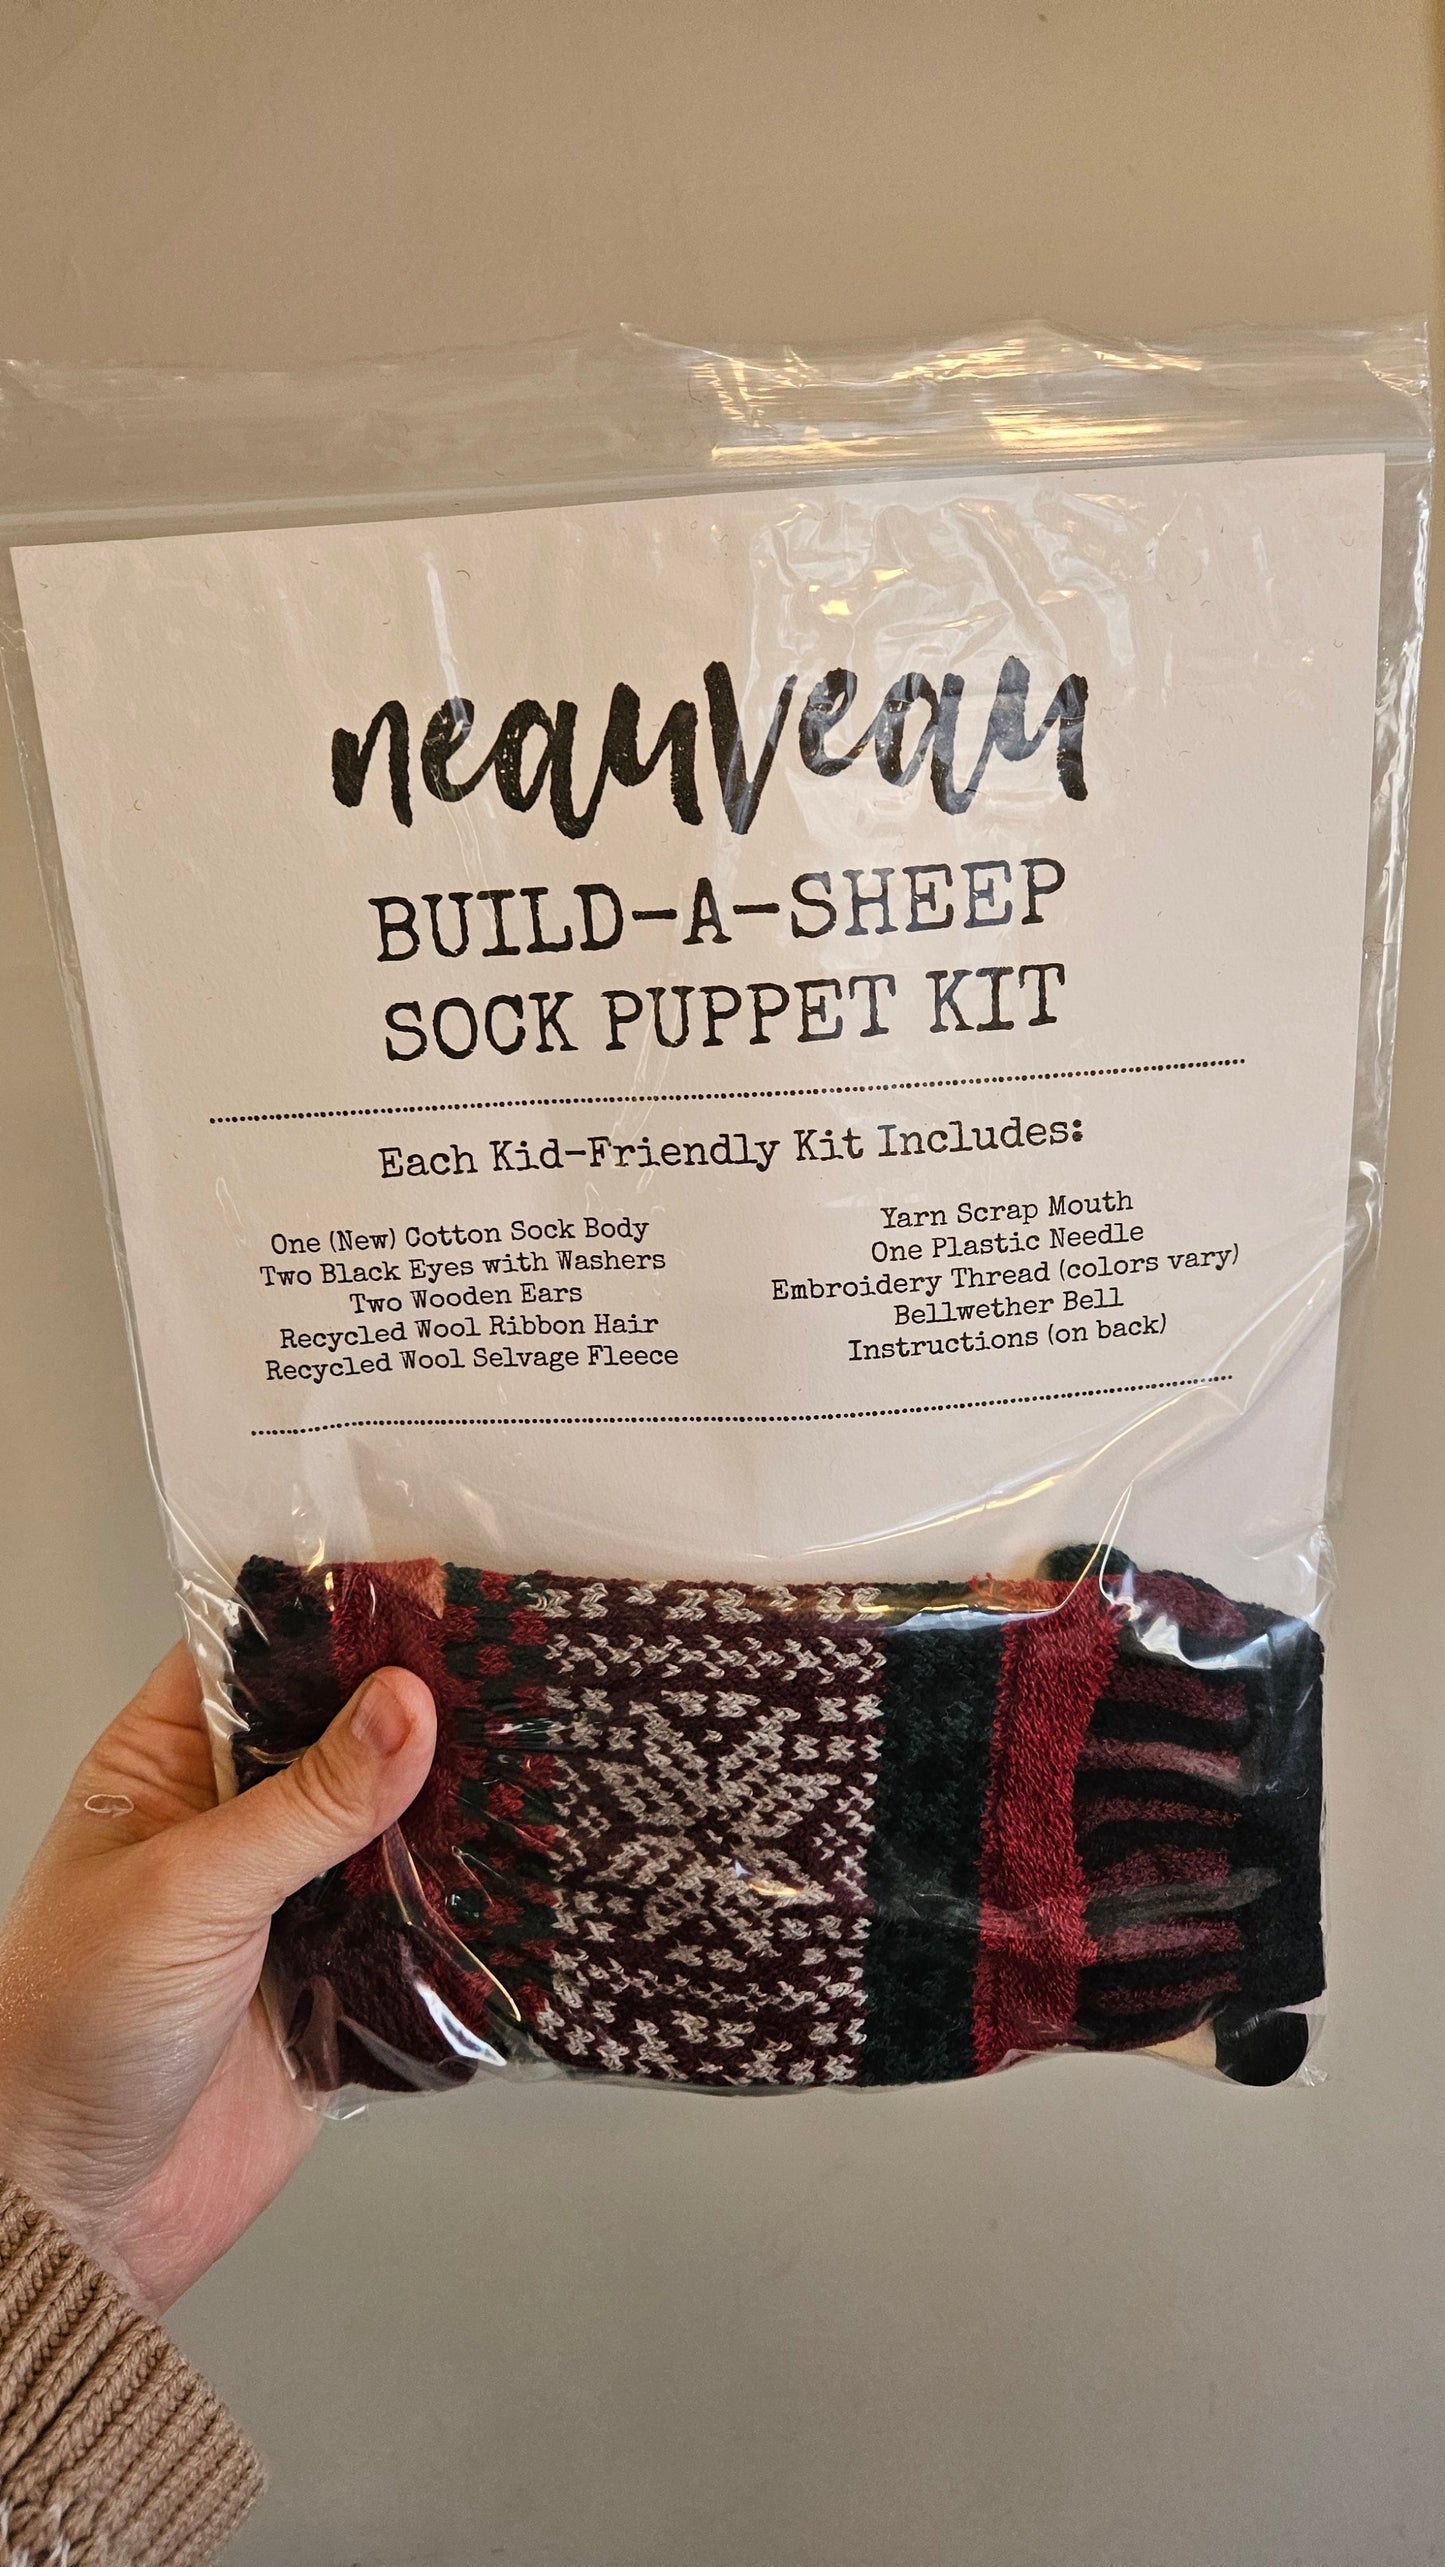 Build-A-Sheep Solmate Sock Puppet Kit - Hipster Sheep